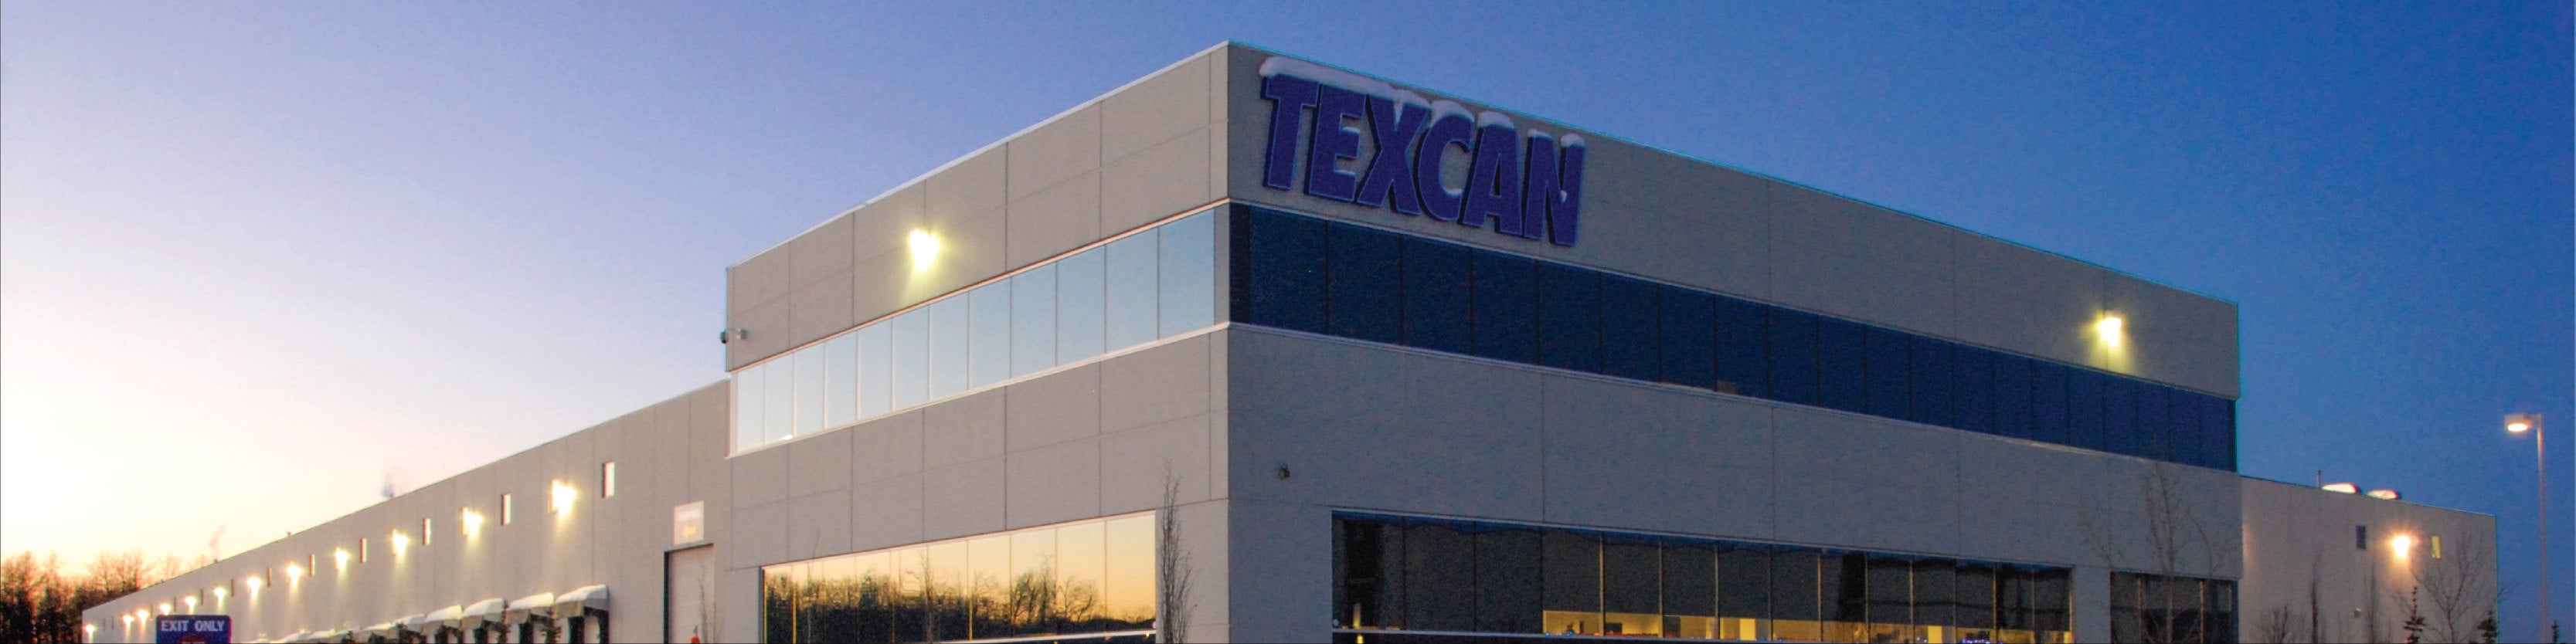 Texcan - News - Company News - Texcan launches new Edmonton-based distribution facility Banner Images